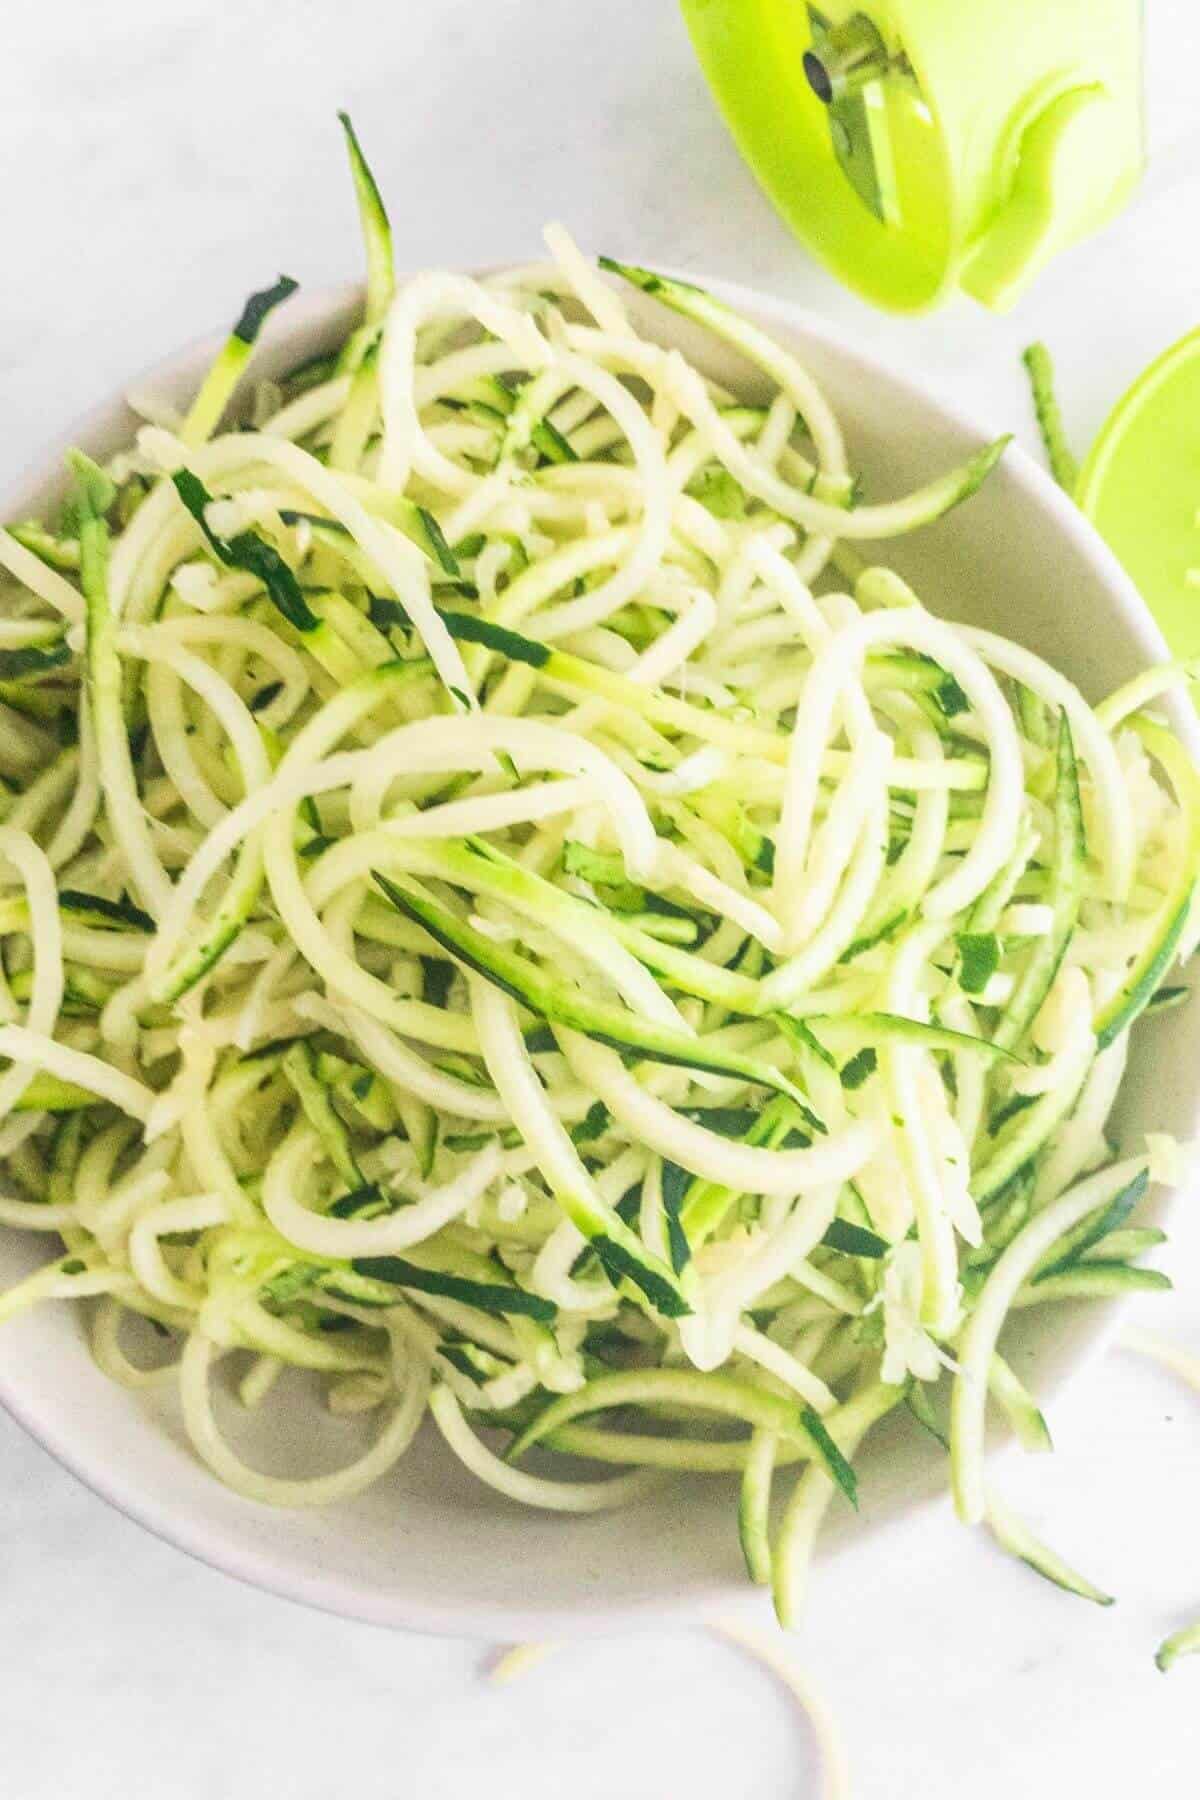 Spiralised courgette noodles.